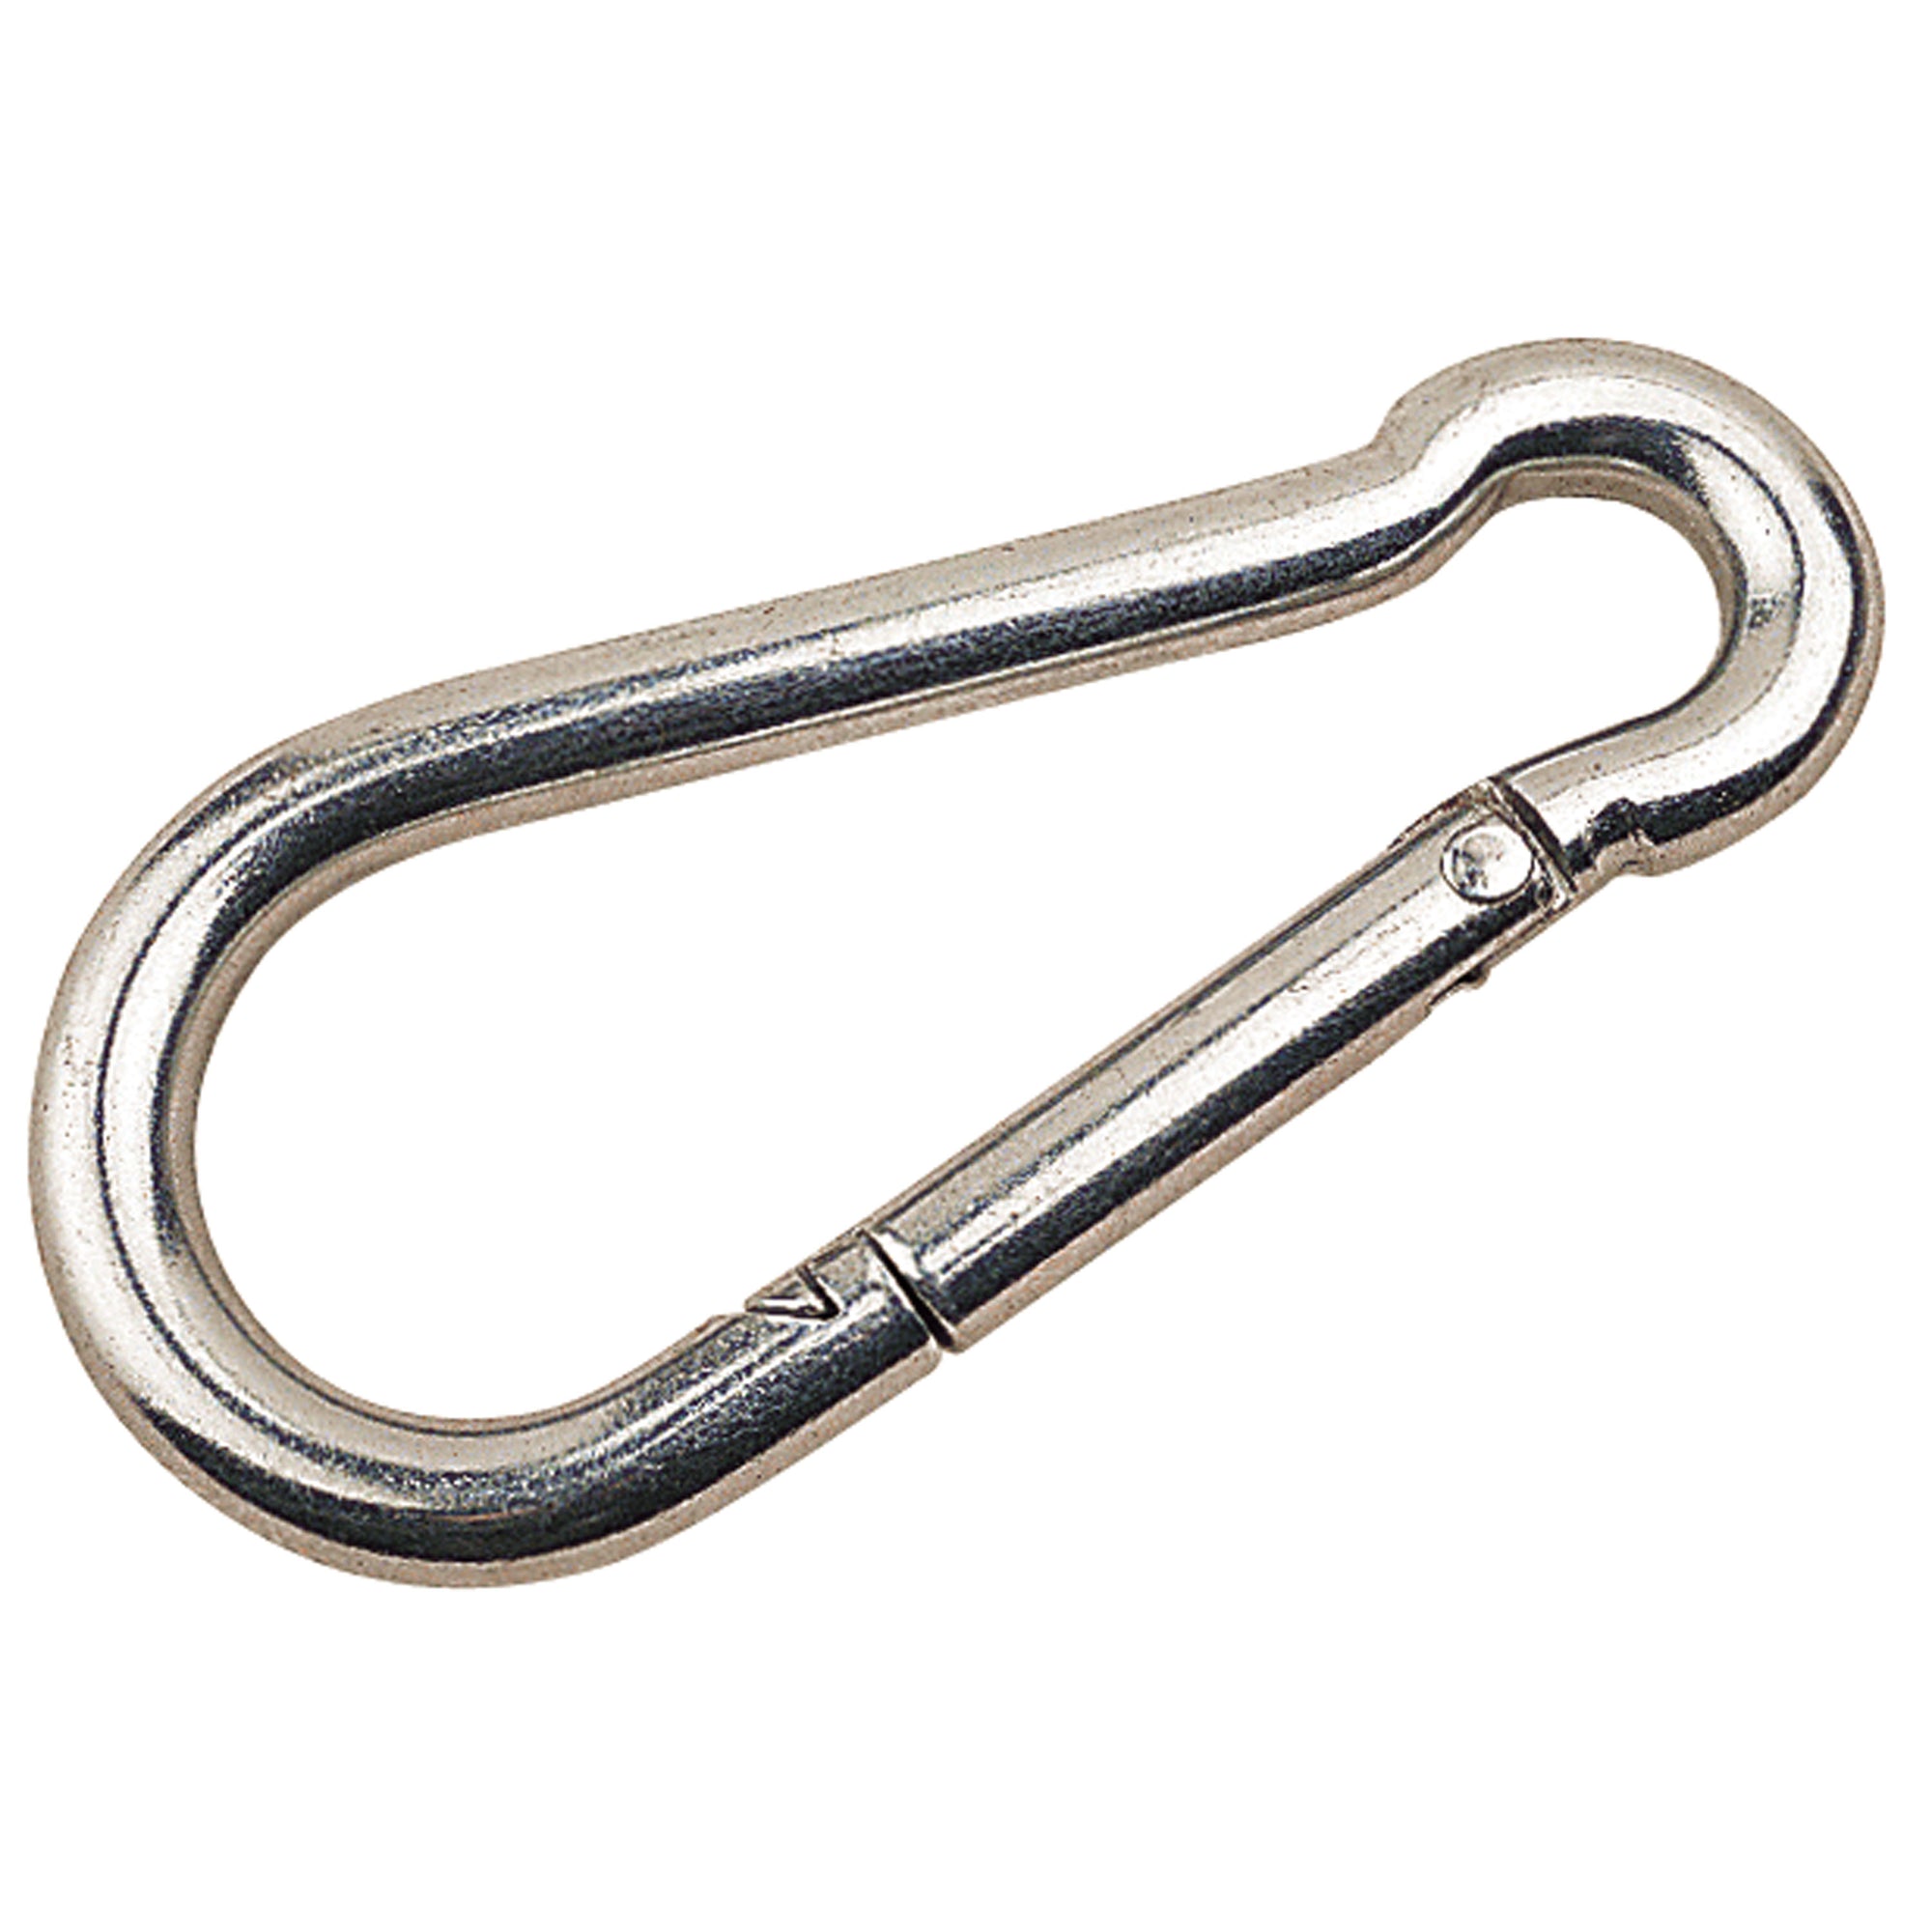 Sea-Dog 156060 1/4" Galvanized Snap Hook - 2-3/8" Length with 5/16" Gate